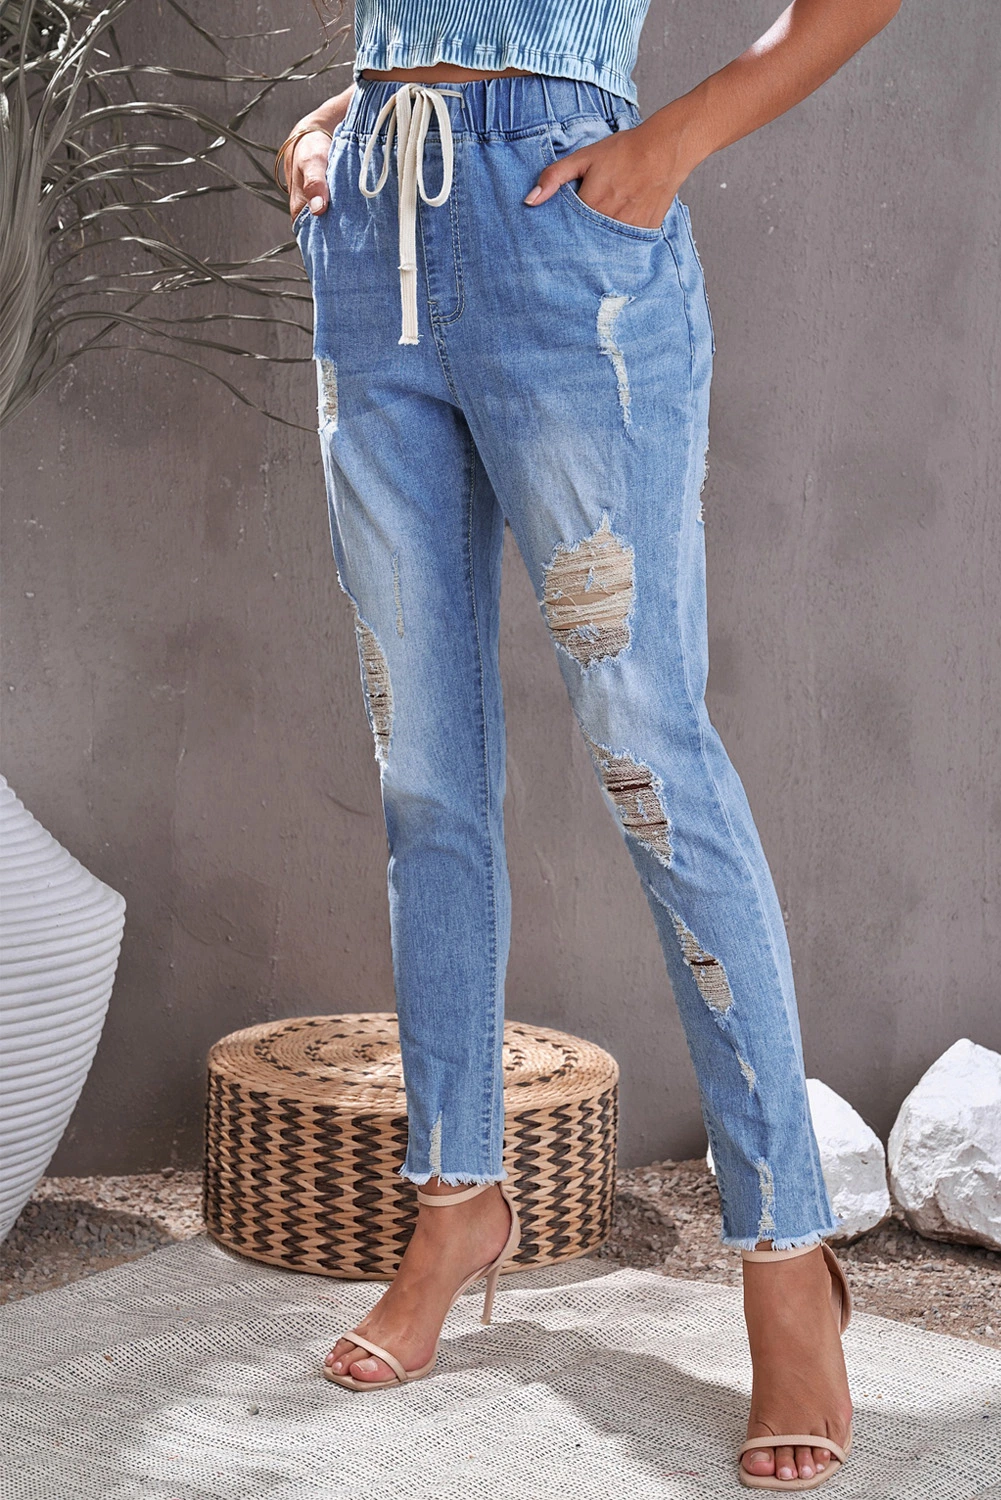 Dear-Lover Blank Apparel Wholesale Western Clothing New Blue Ripped Baggy Distressed Pants Trousers Ladies Torn Hole Stretch Women Denim Women&prime;s Jeans